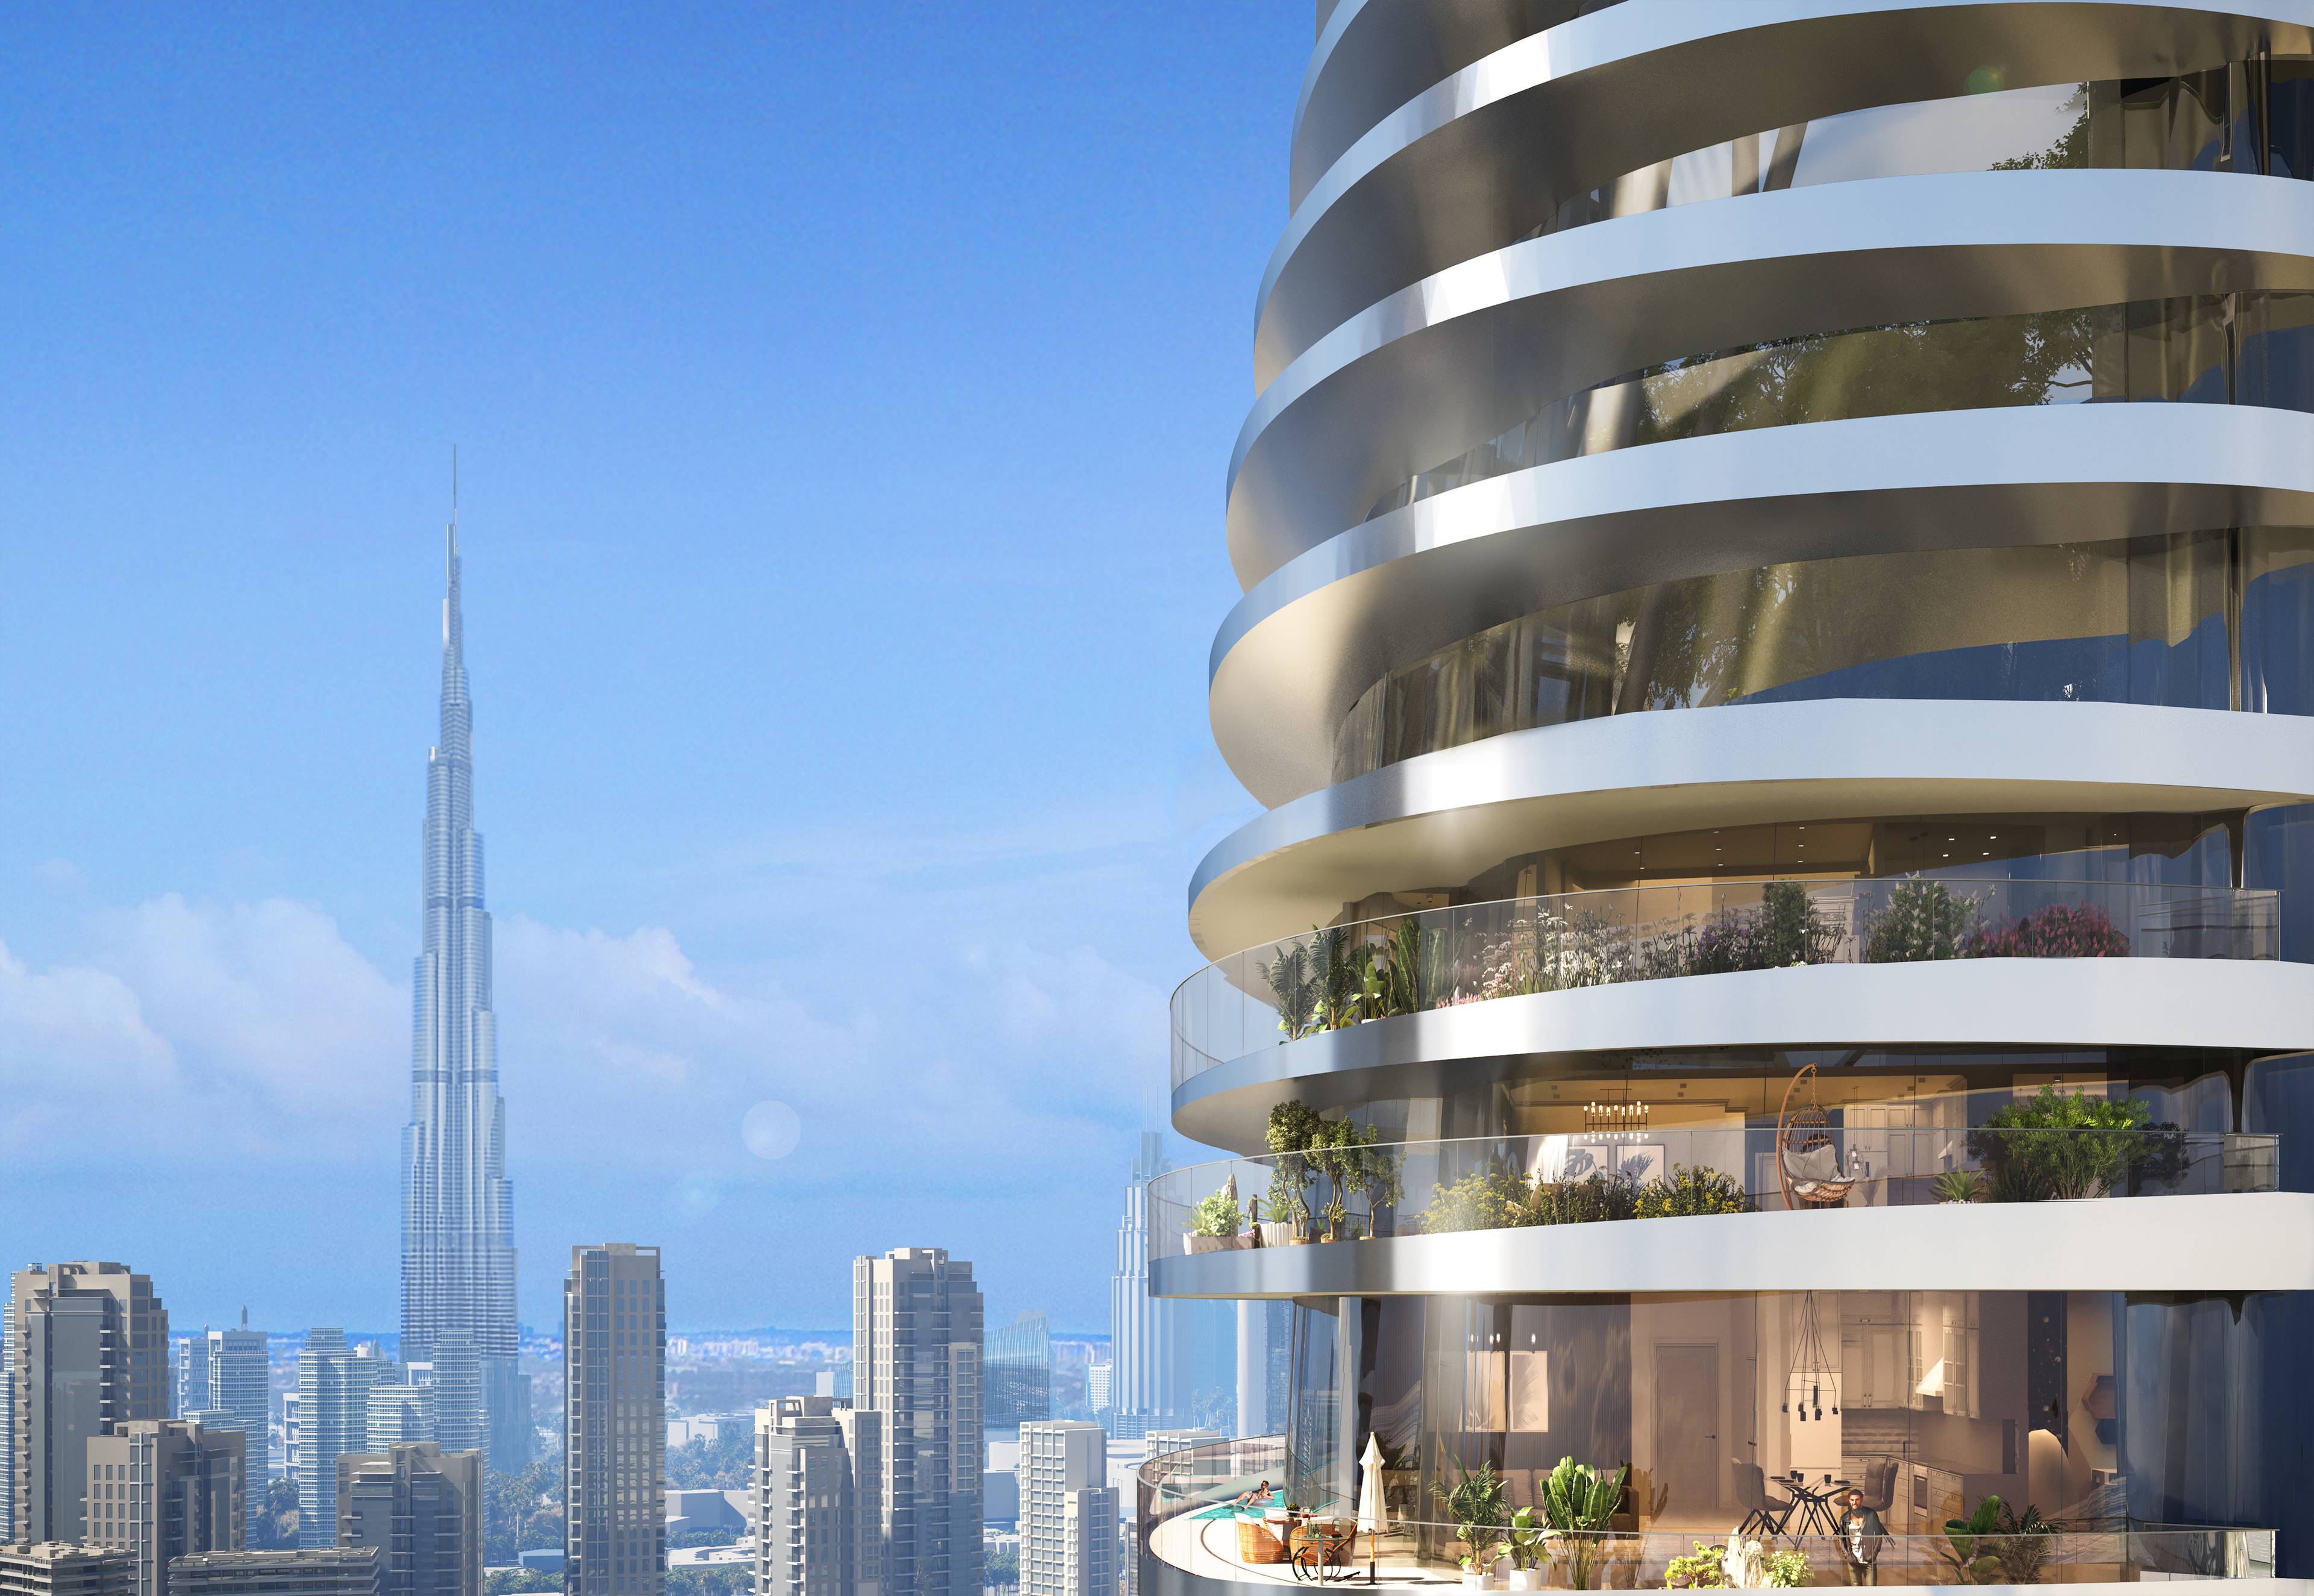 UNPARALLELED VIEWS OF DUBAI CANAL & DOWNTOWN IN THIS SPACIOUS 2-BEDROOM APARTMENT WITH SOLAR SYSTEM THEMED GARDEN